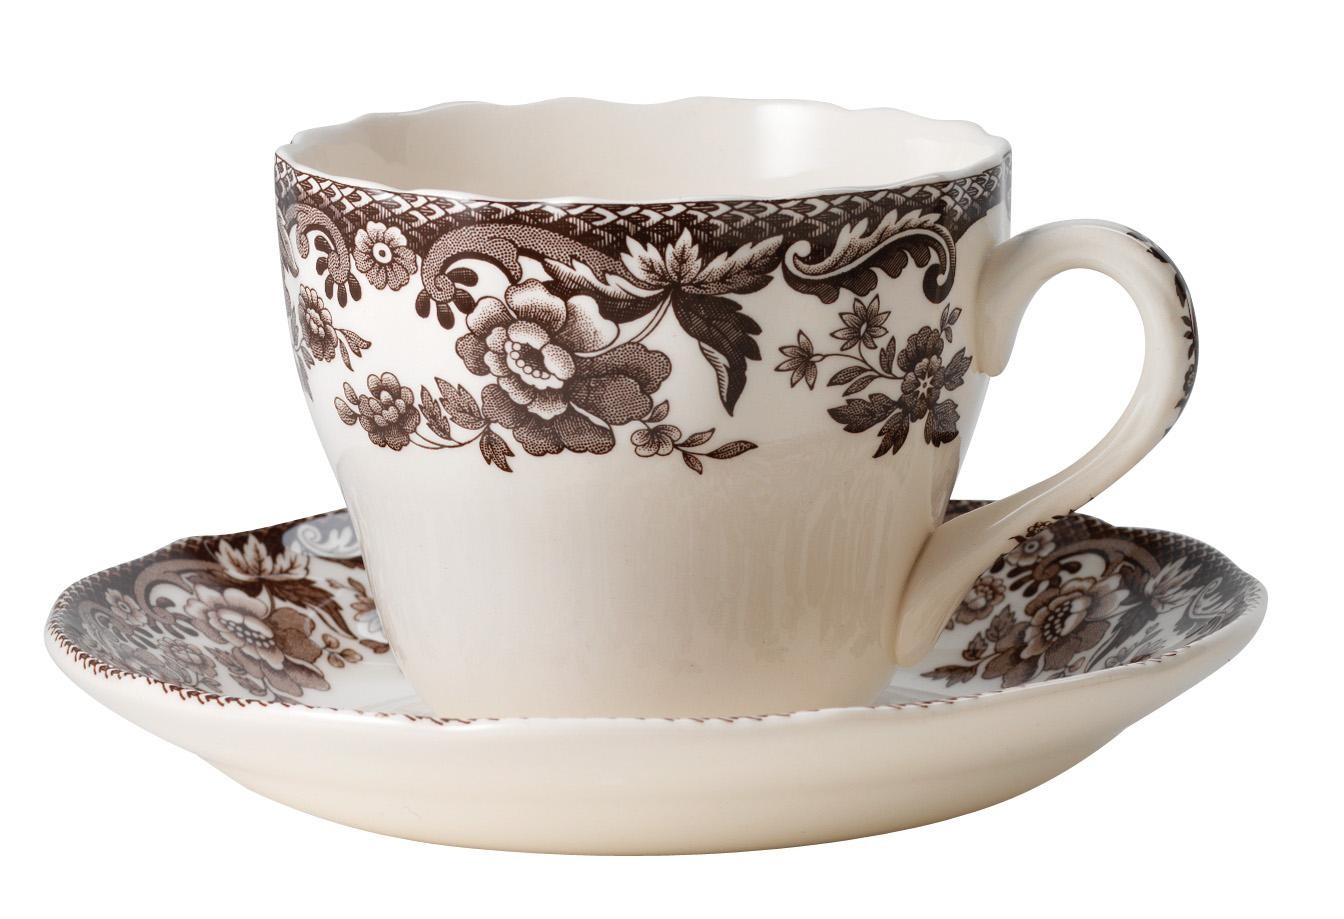 spode-delamere-cup-and-saucer-4025078.jpg